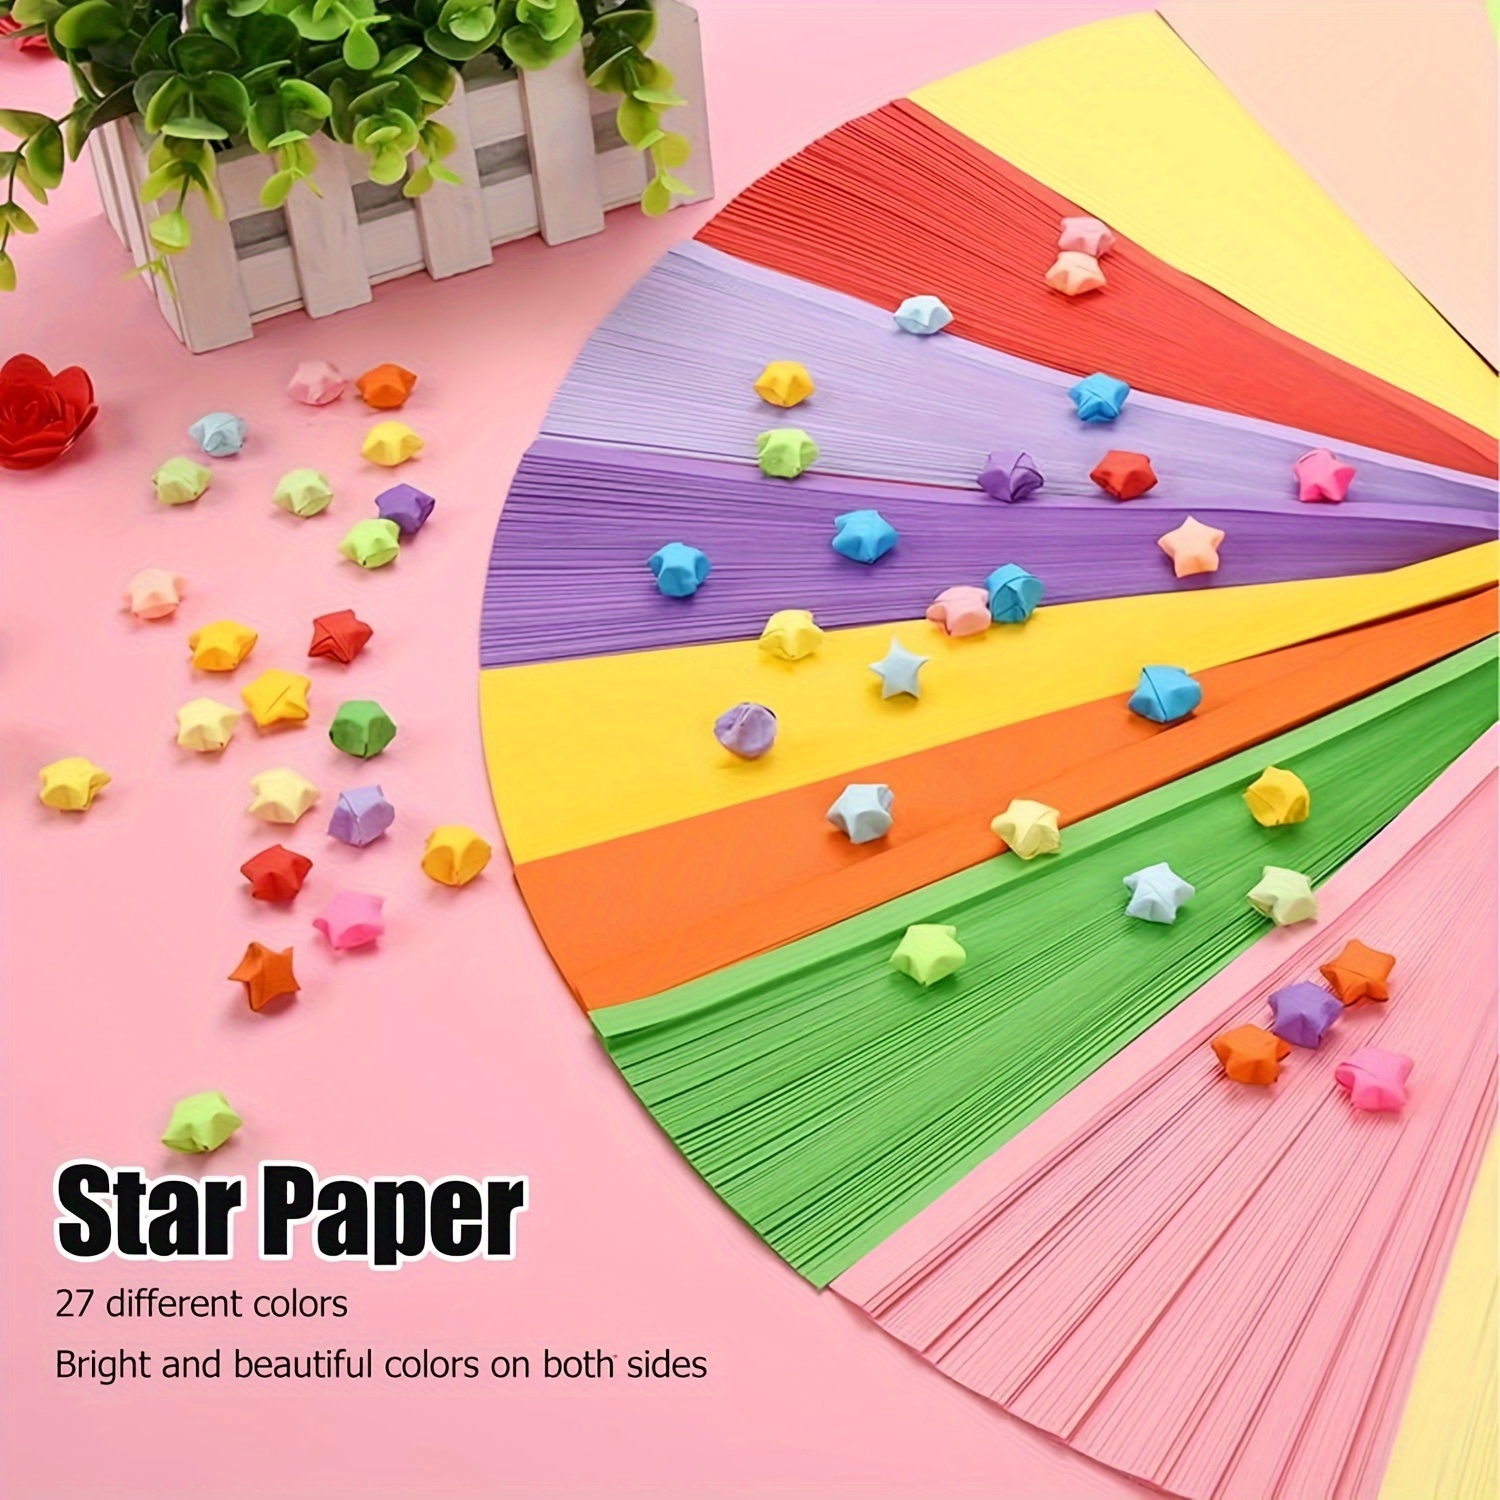 Mity rain 540PCS Star Paper Strips, 7 Solid Colors Origami Star Paper  Strips, Lucky Star Paper Strips for Stress Relive/Hands-on  Ability/Decorations